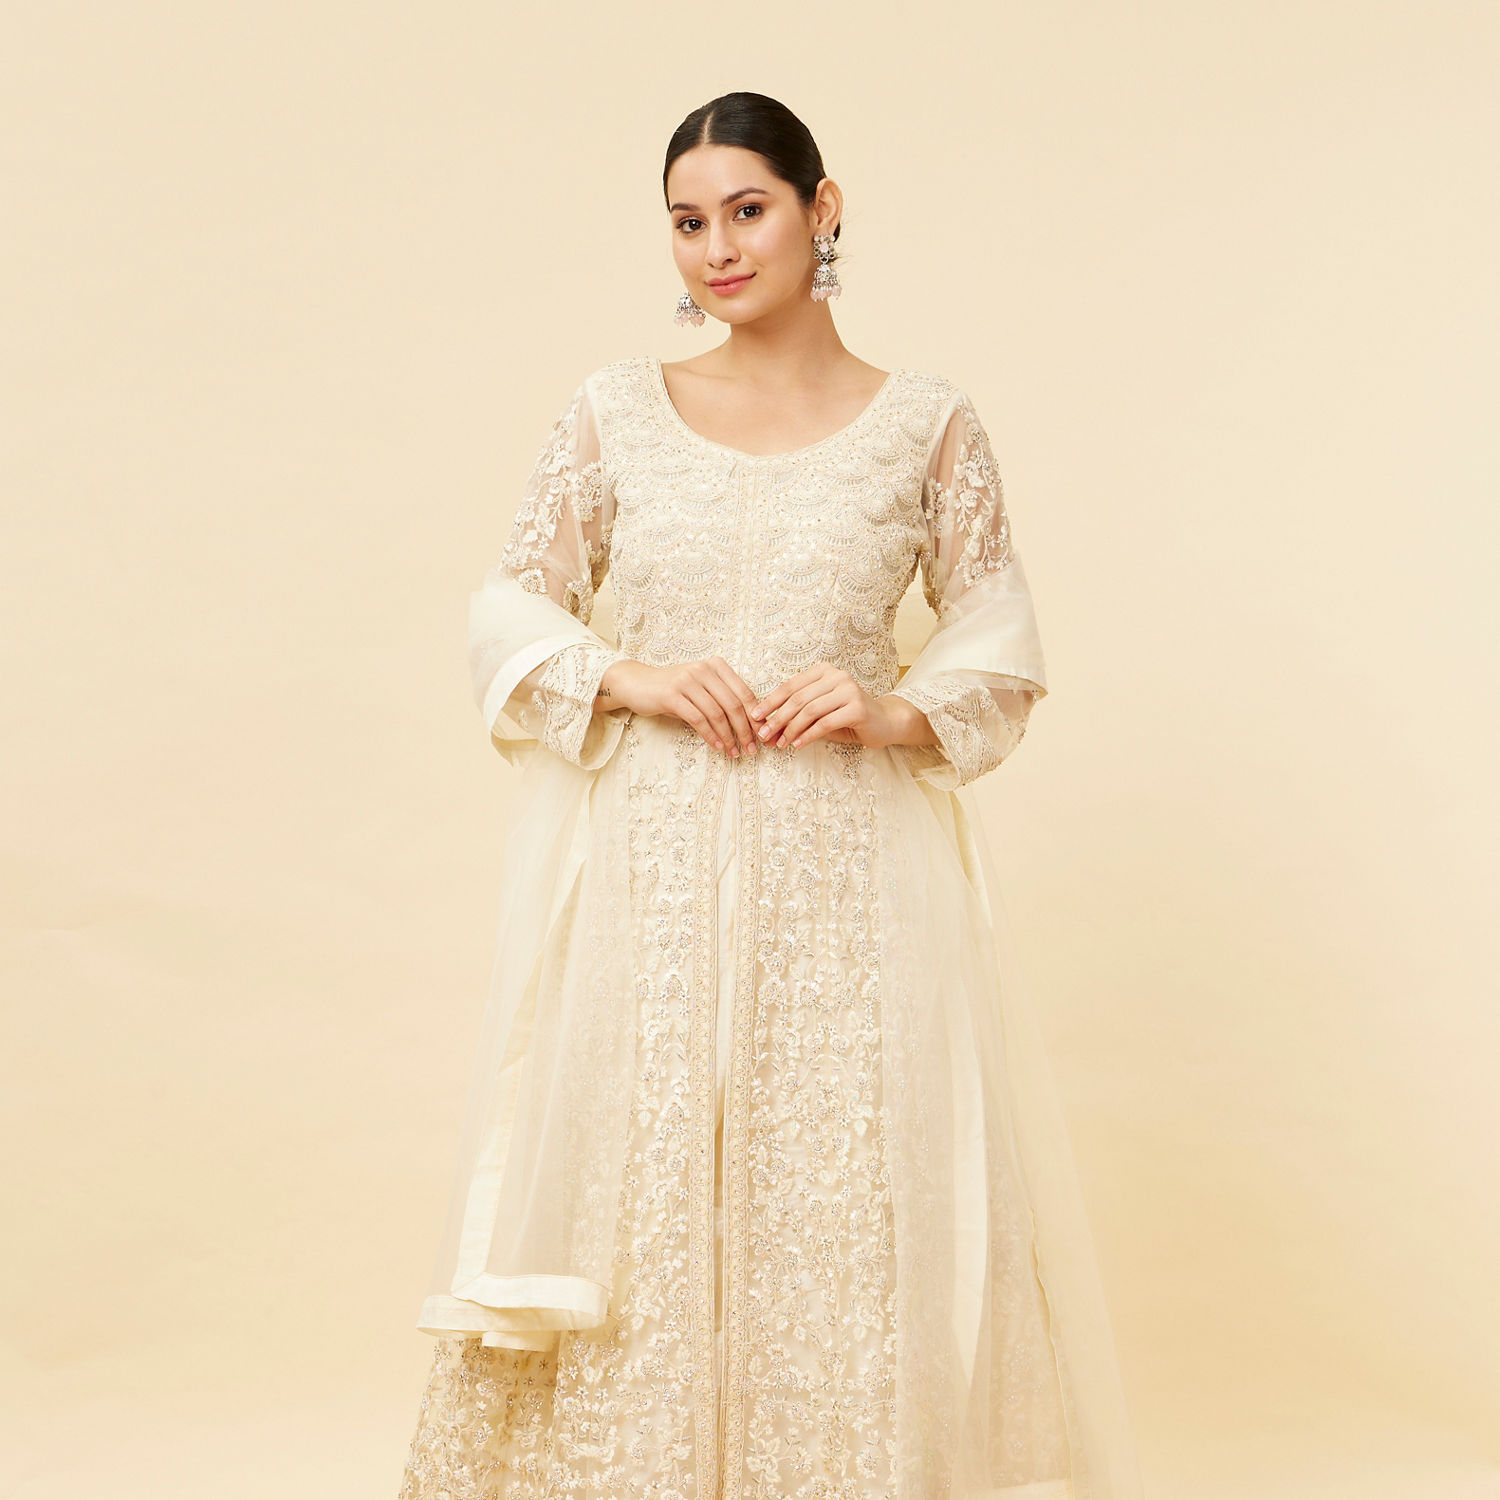 5 Different Indo Western Gowns for Wedding | Indian Fashion Mantra